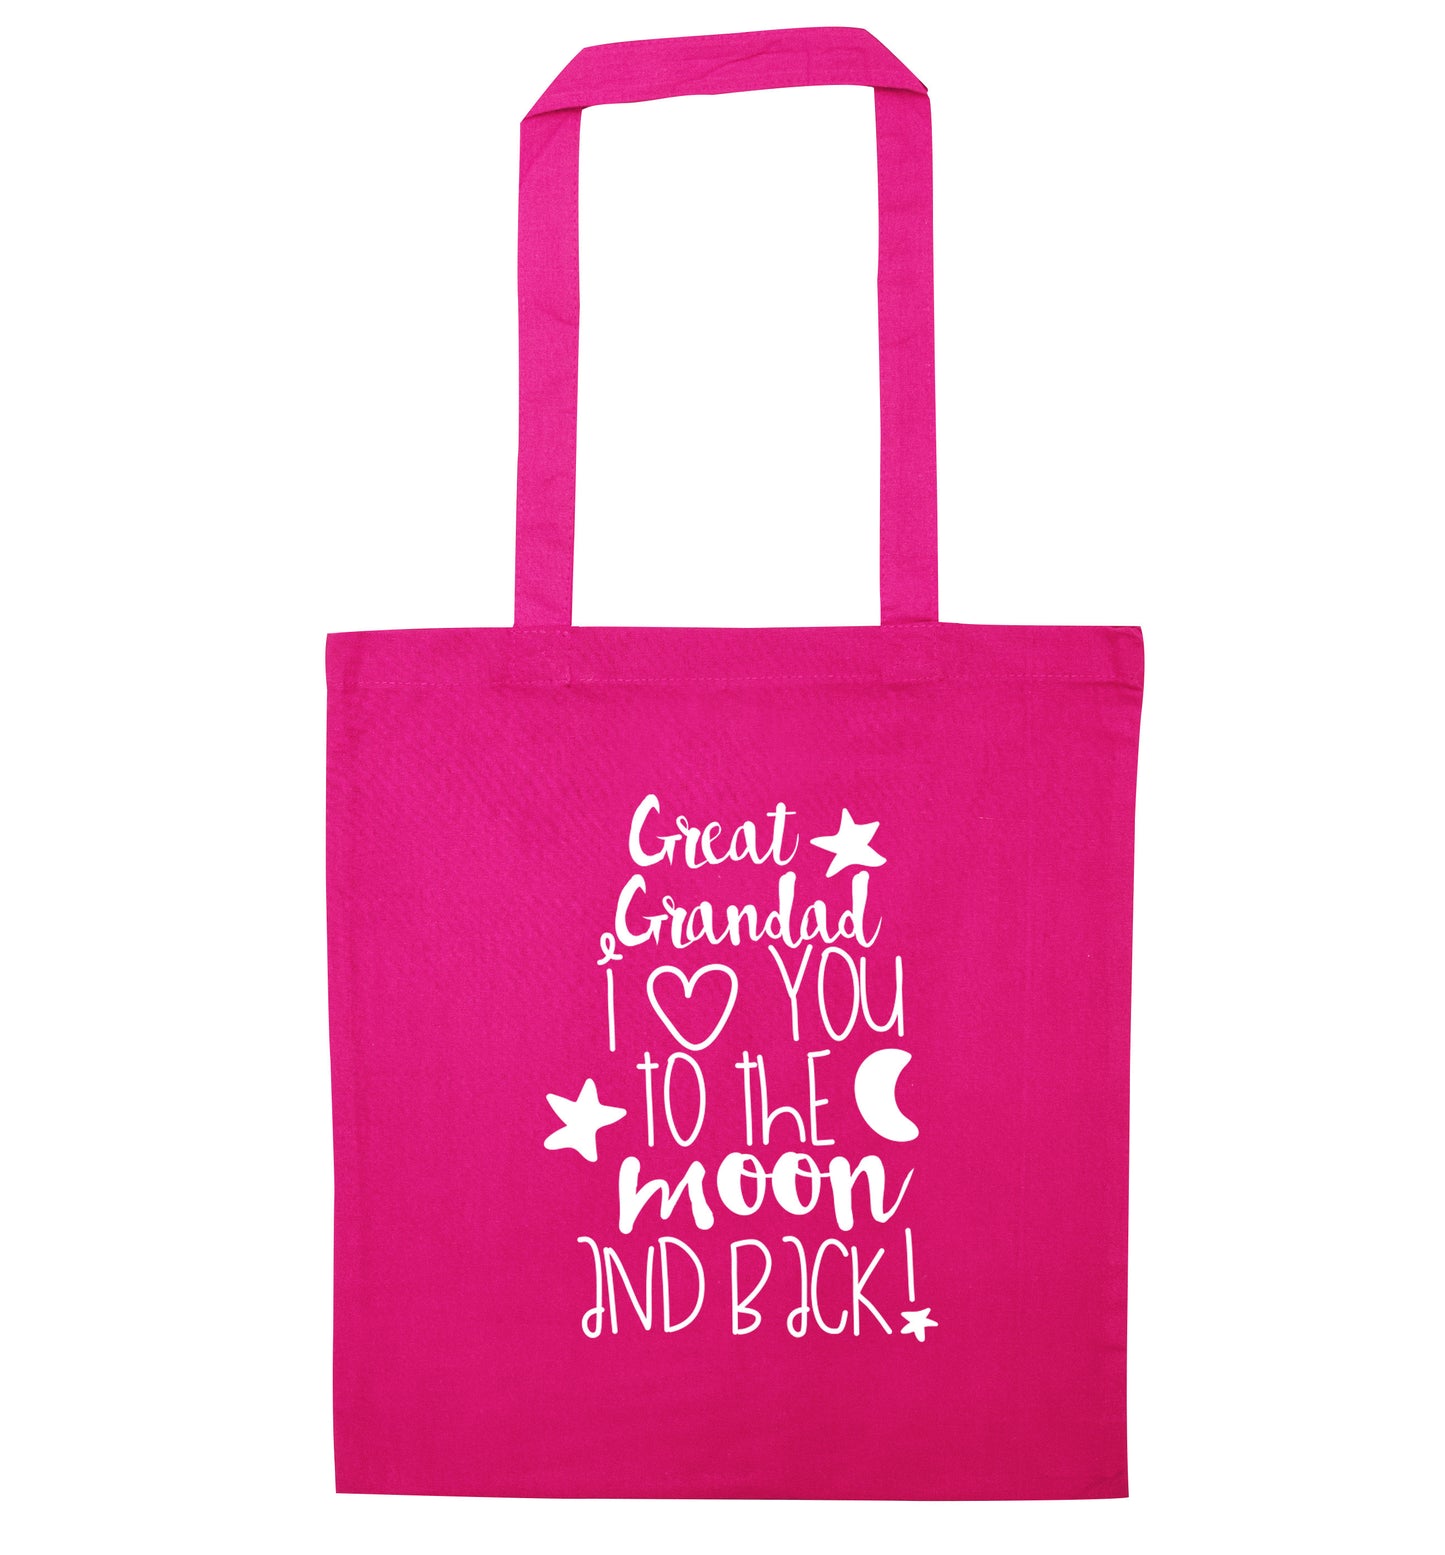 Great Grandad I love you to the moon and back pink tote bag